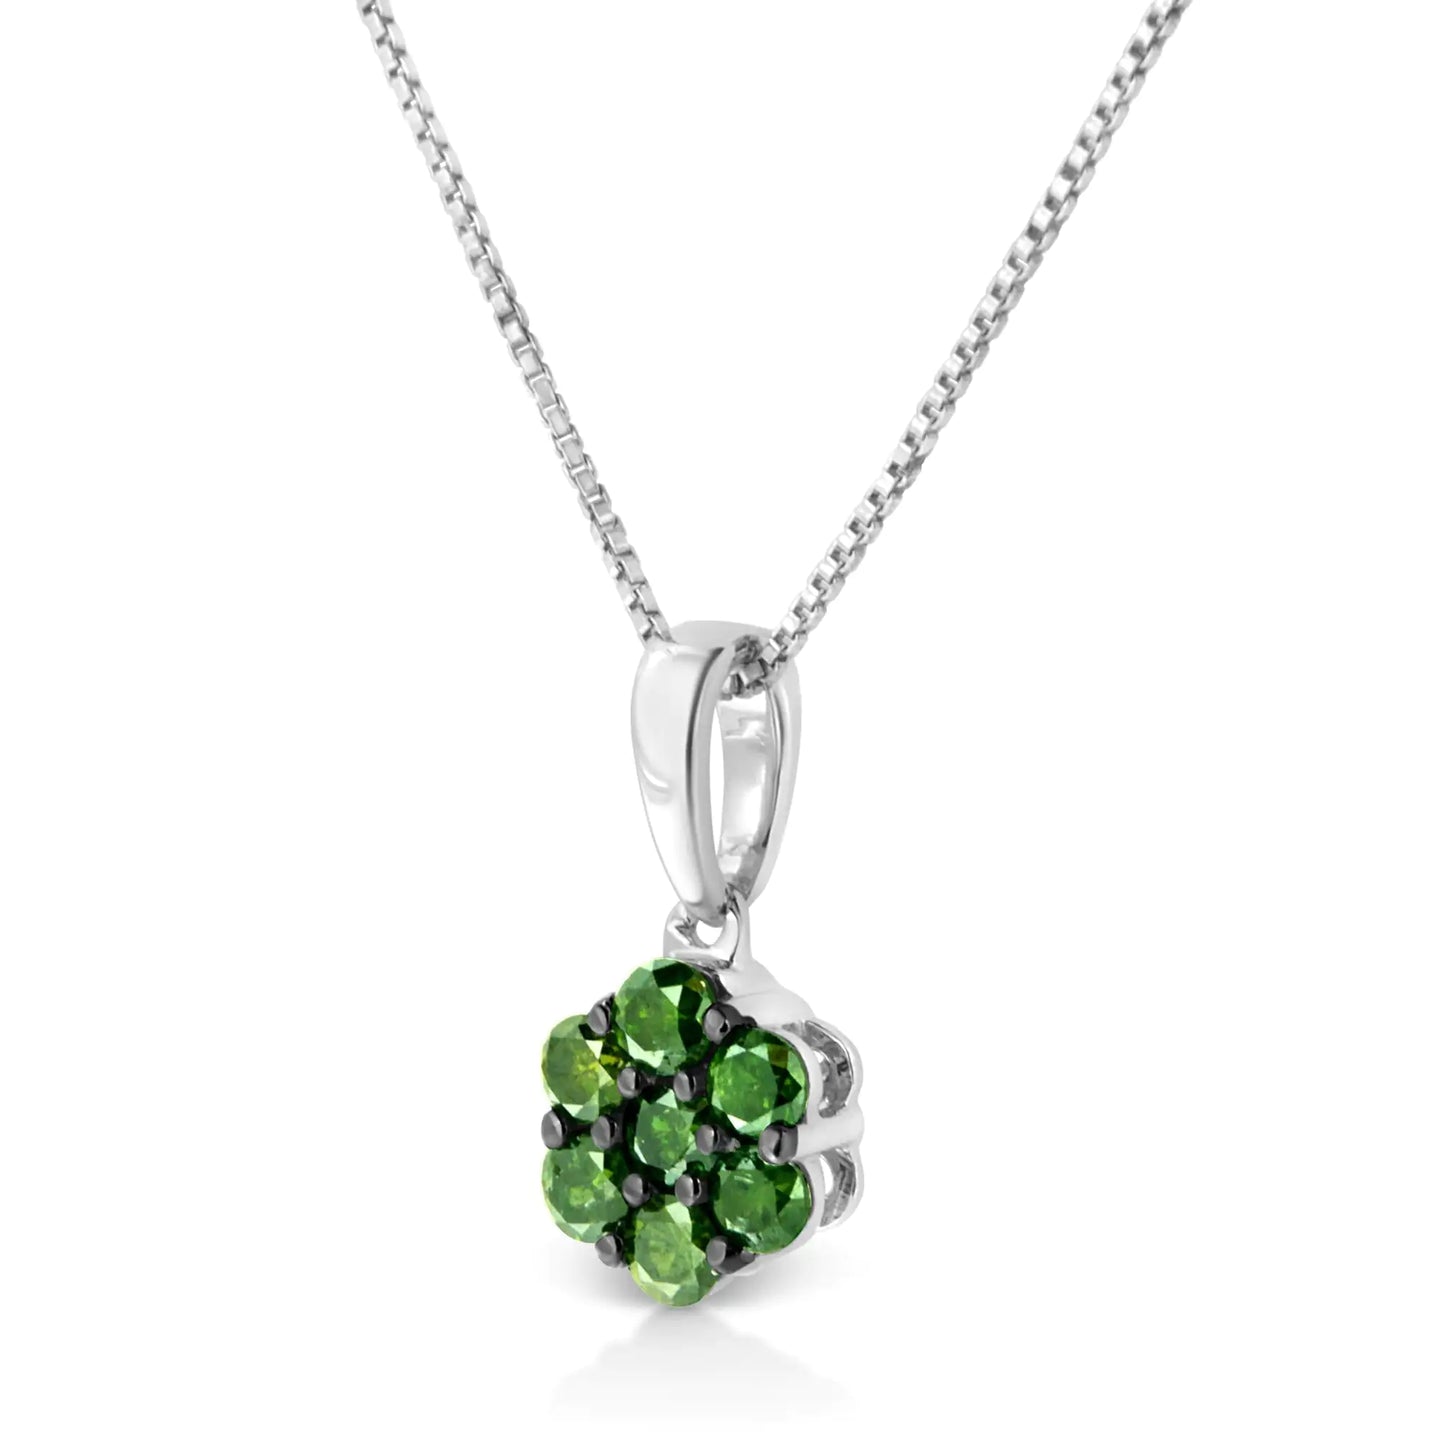 .925 Sterling Silver Prong Set Color Treated Diamond Floral Cluster 18" Pendant Necklace